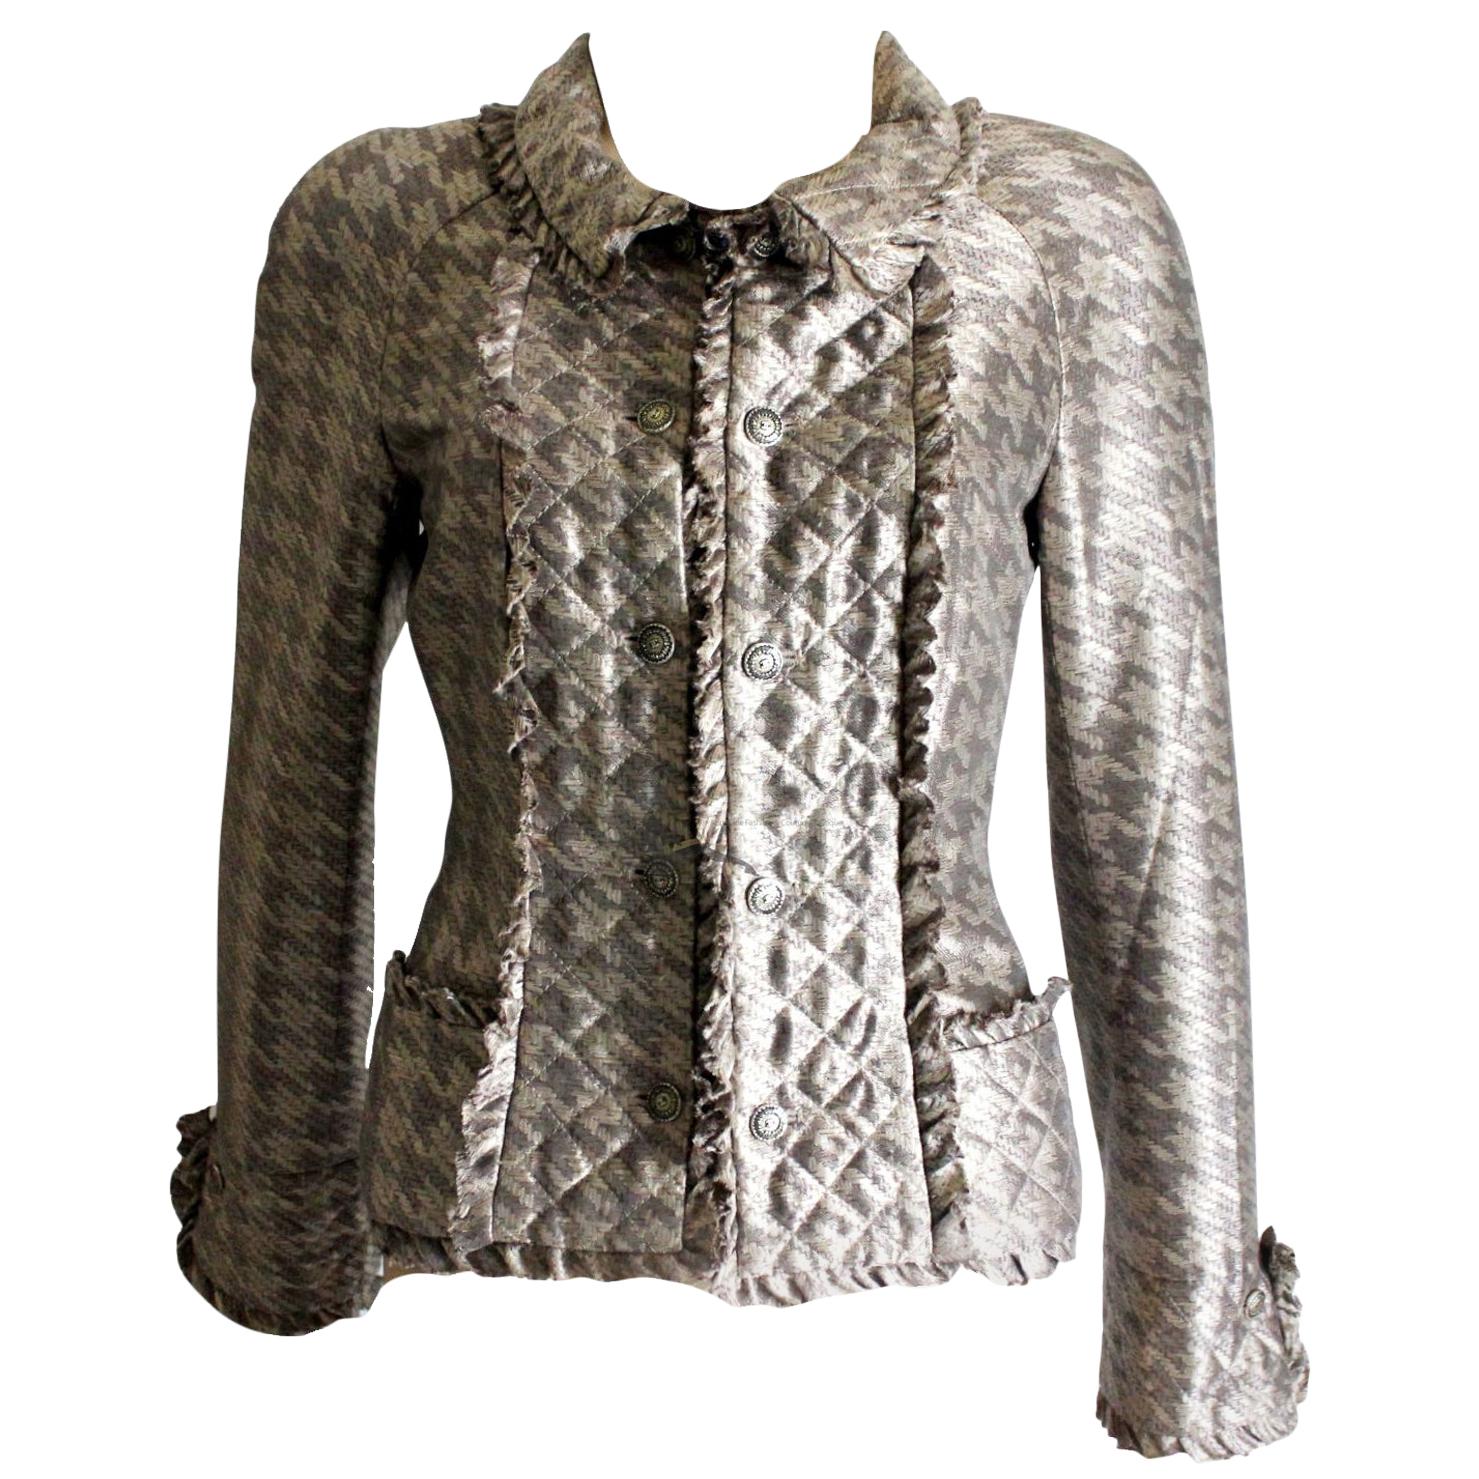 Superbe Chanel METIERS D'ART Quilted Silk Jacket Blazer with Ruffles